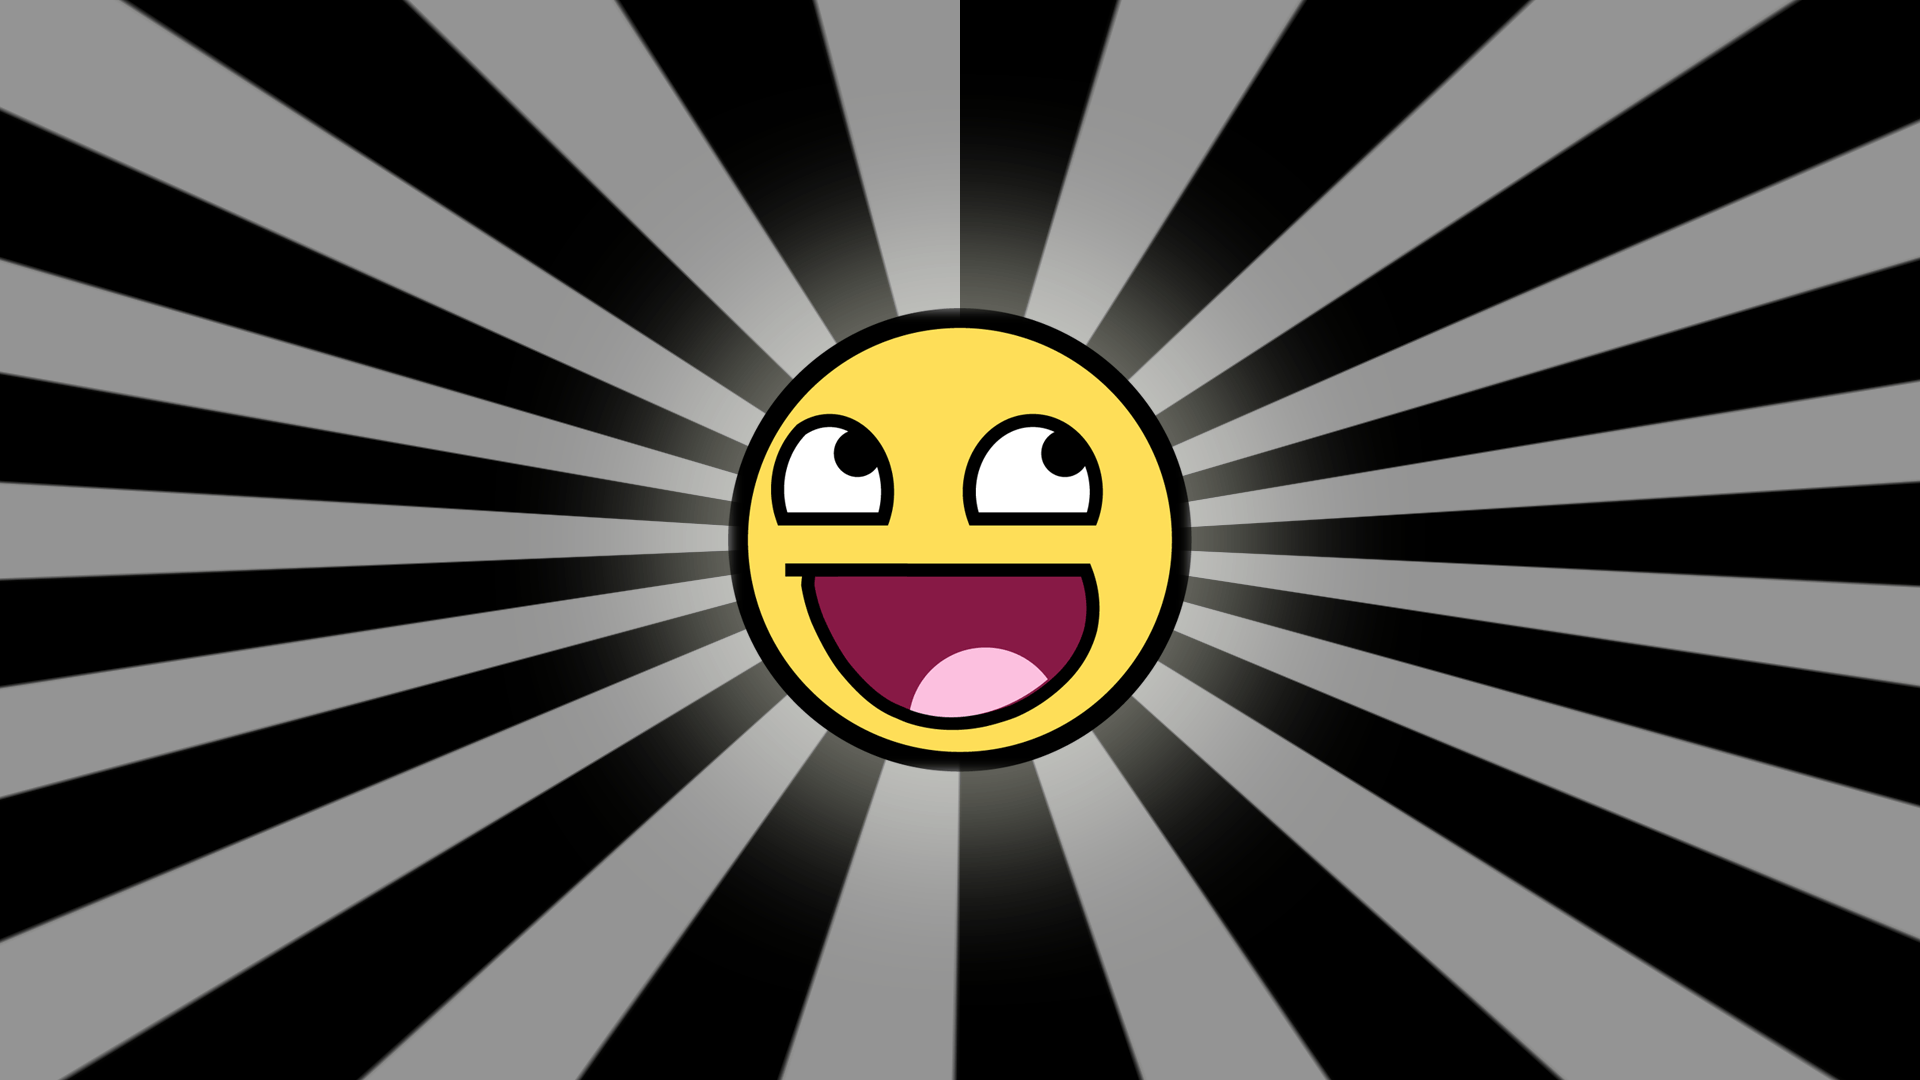 Wallpaper For > Awesome Face Background